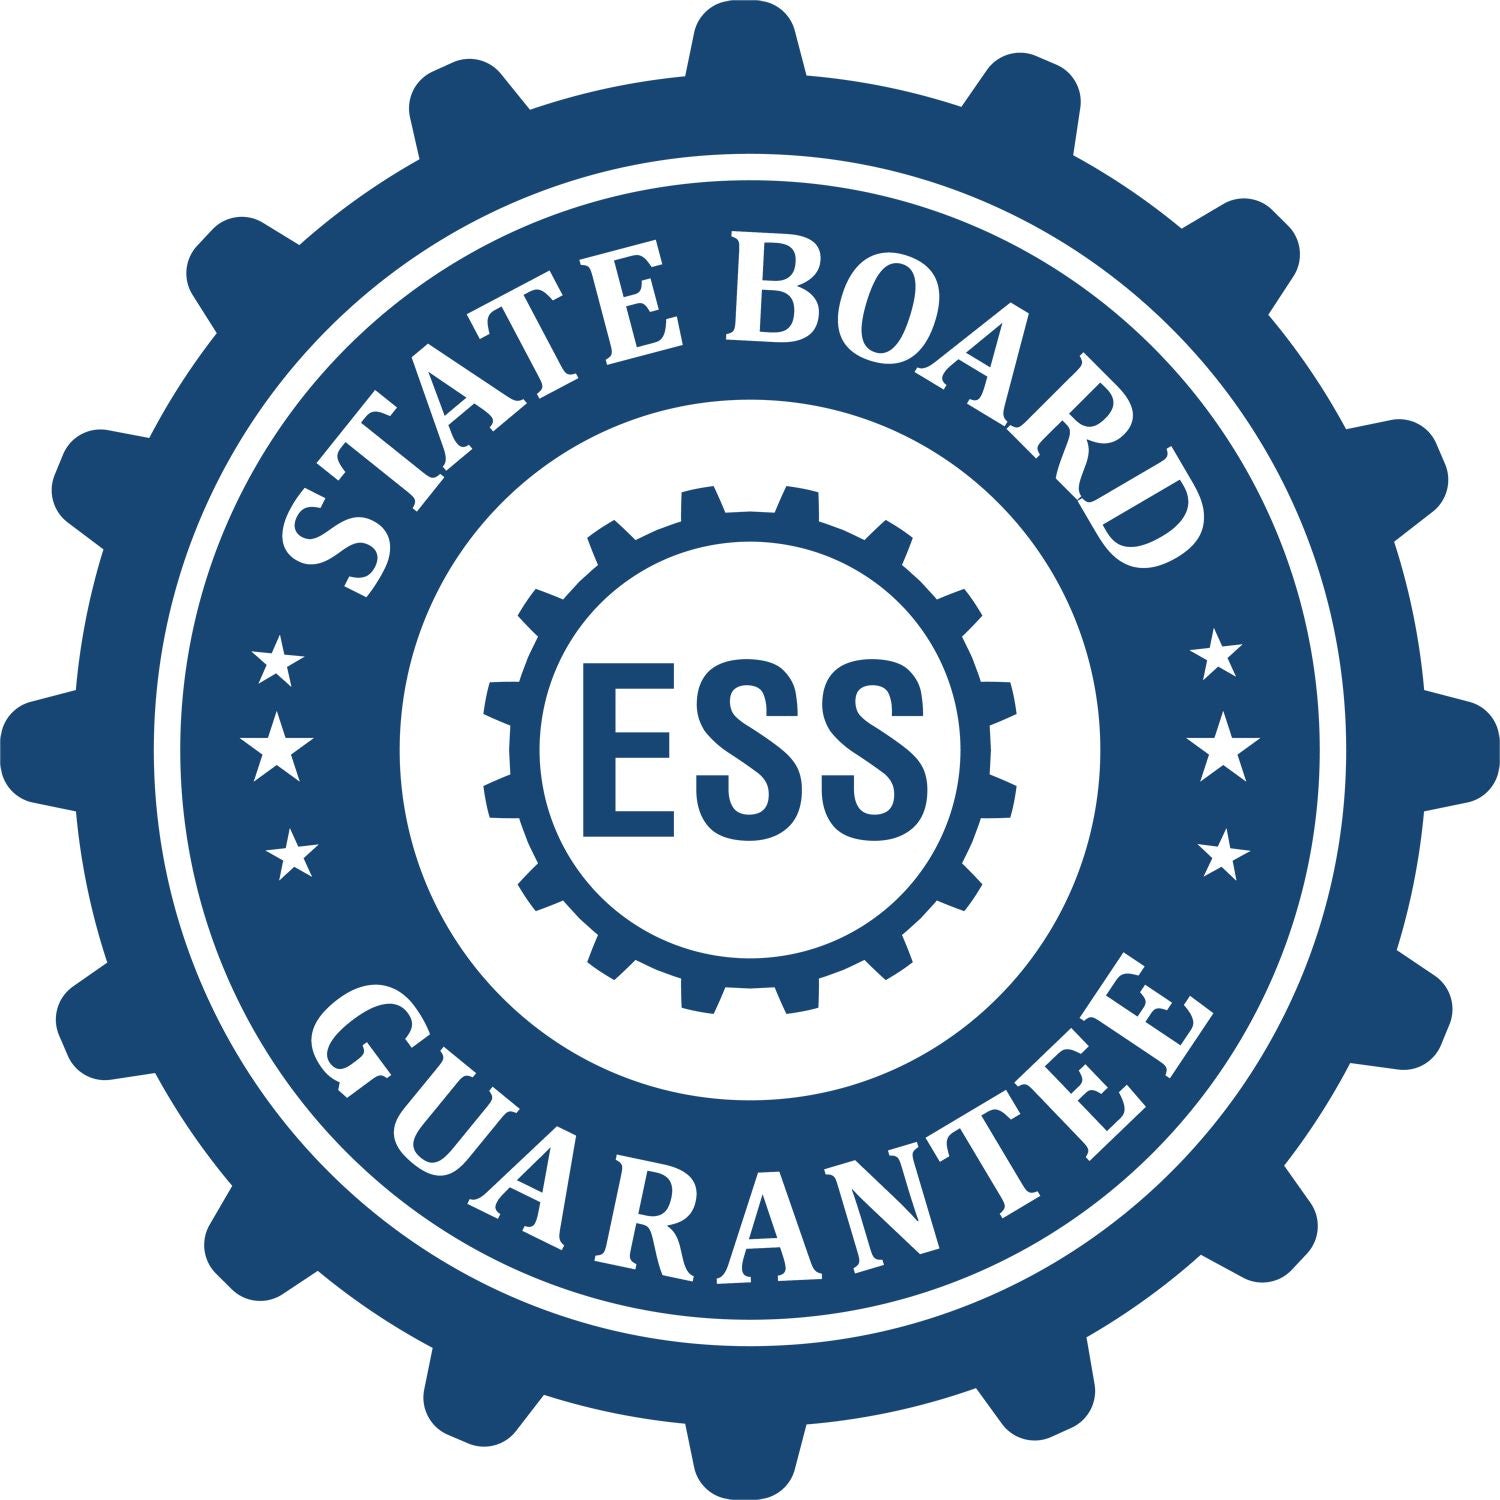 An emblem in a gear shape illustrating a state board guarantee for the Digital Nevada Landscape Architect Stamp product.